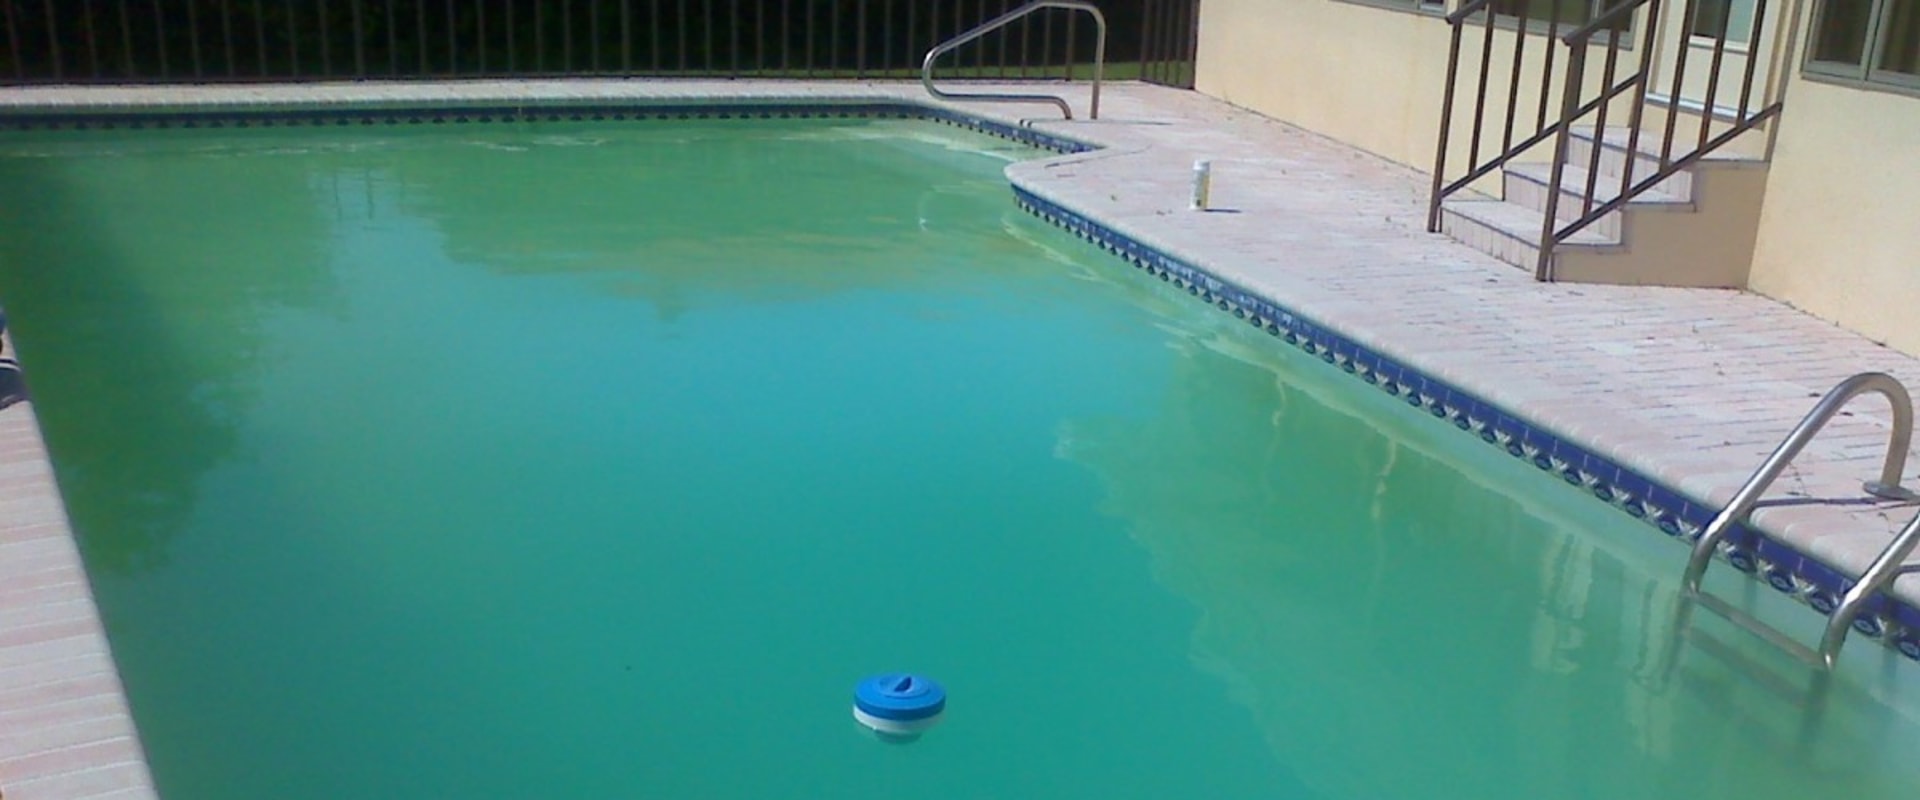 automatic pool covers south africa